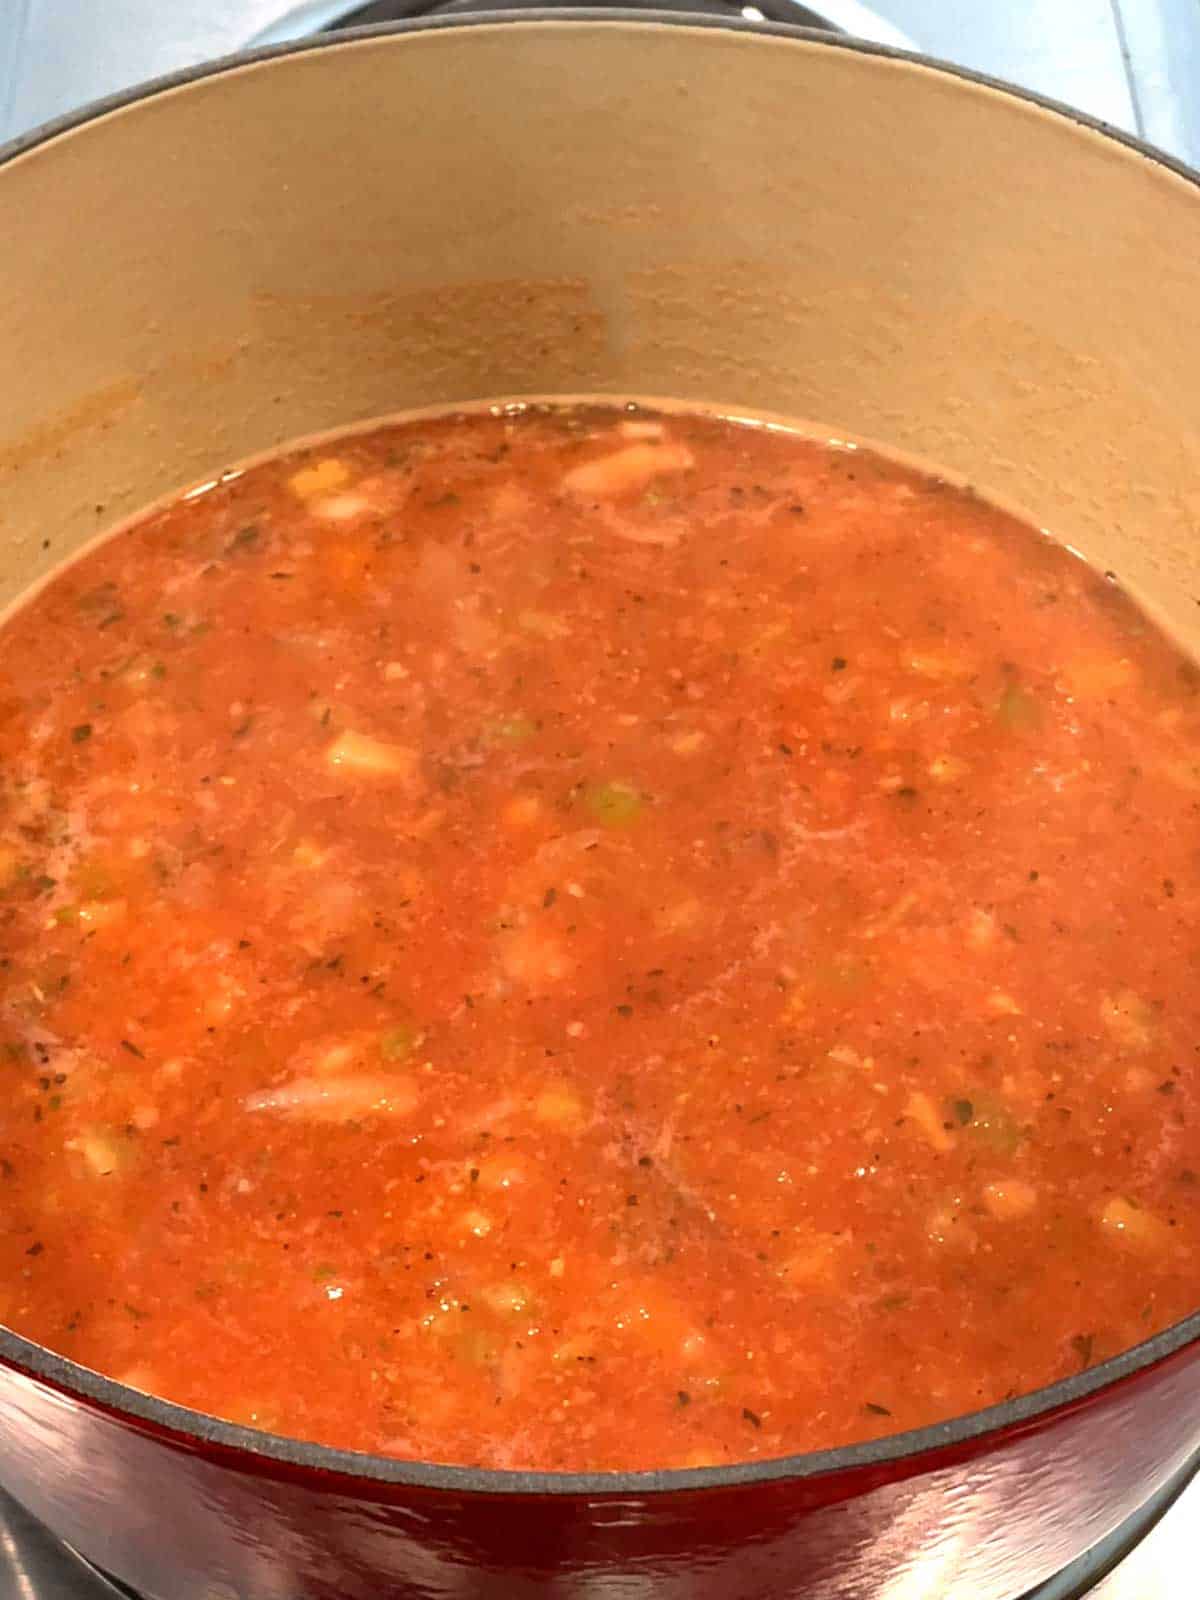 Bringing soup to a boil